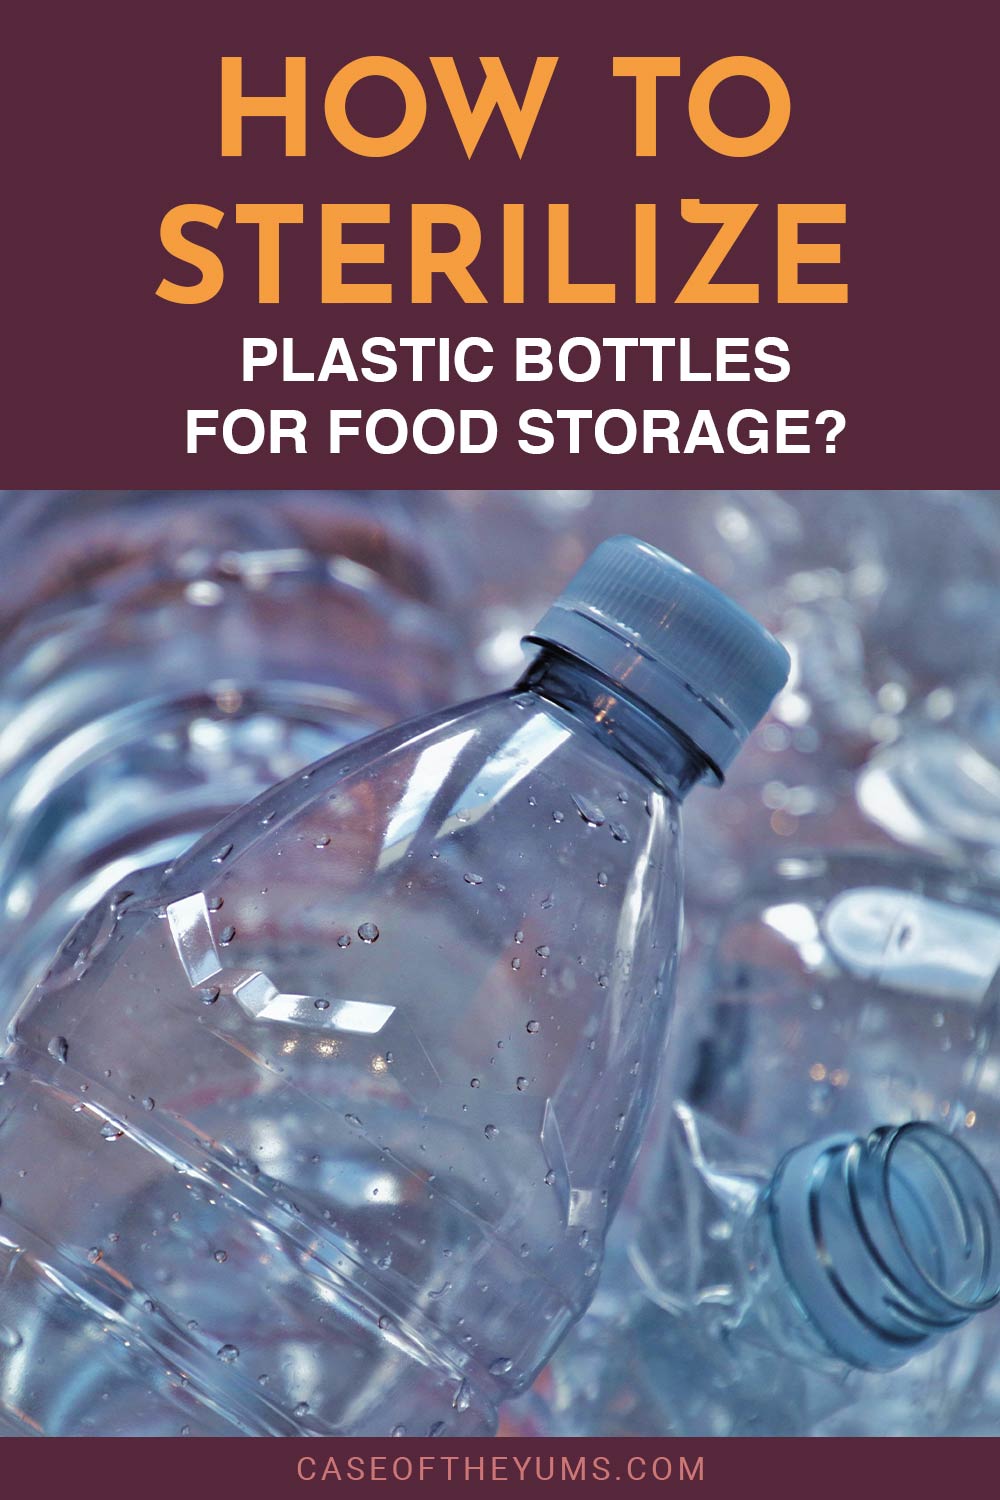 Empty water bottles - How to sterilize them for food?